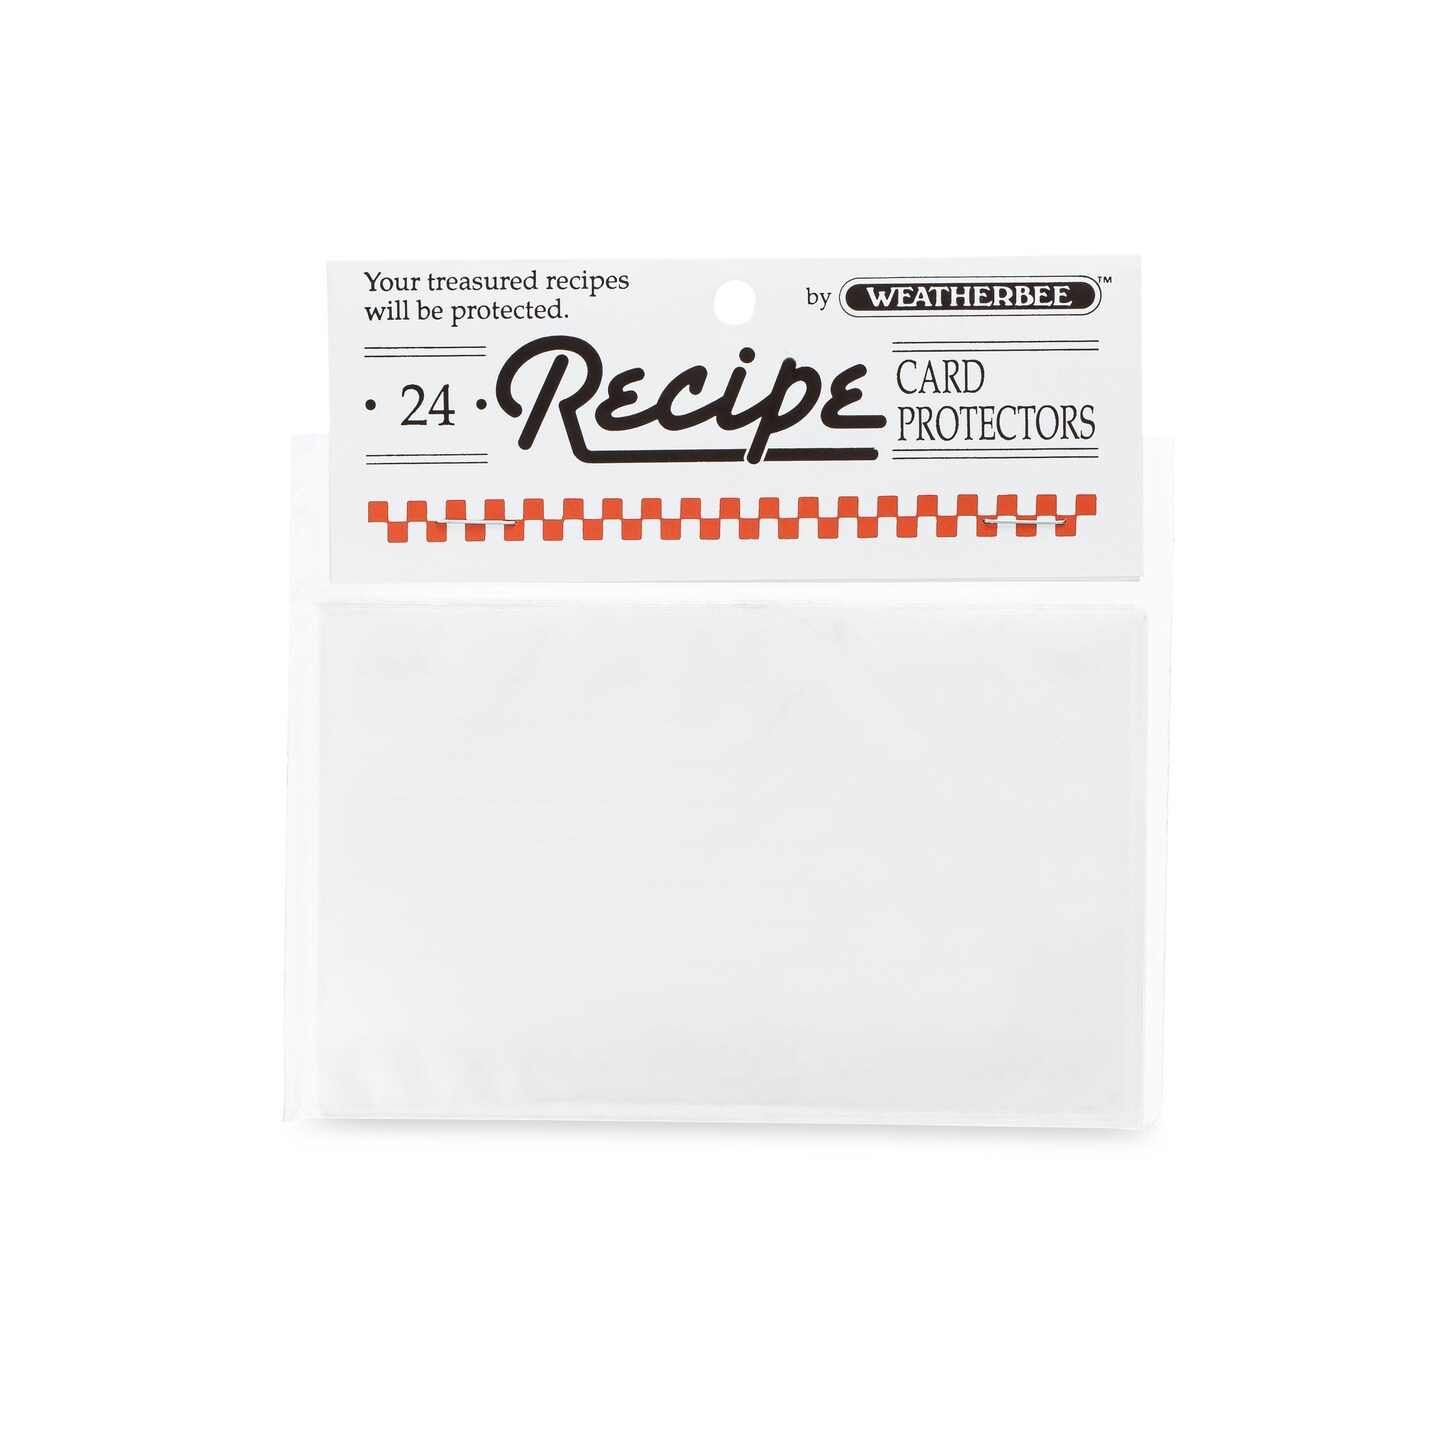 Weatherbee Recipe Card Protectors / 3 X 5 INCHES